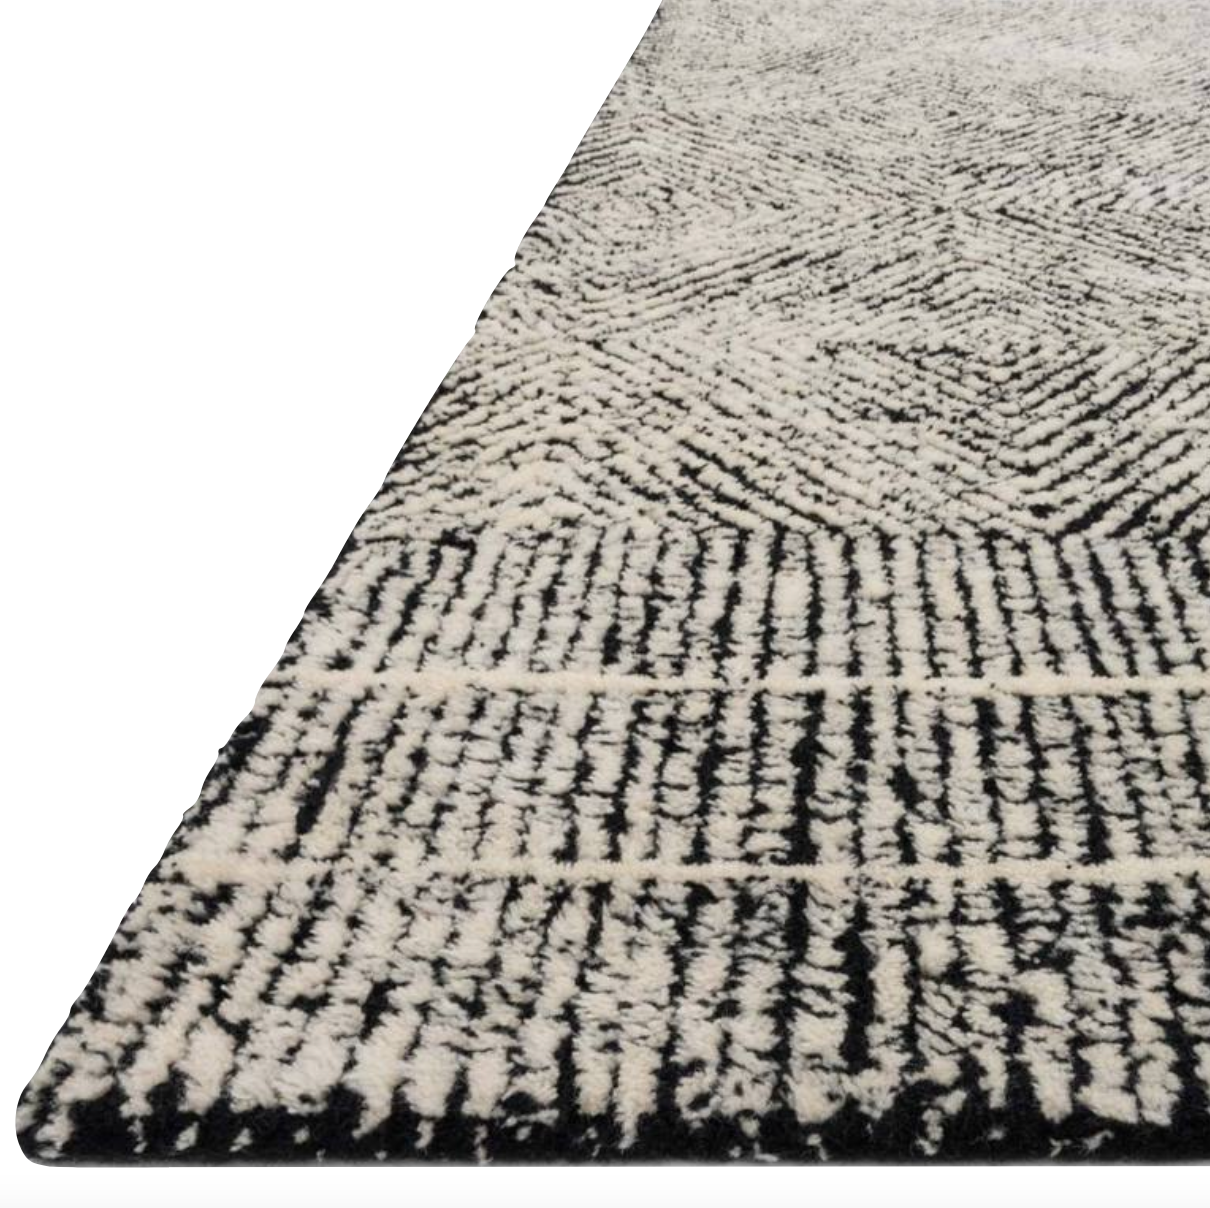 With stunning and delicate linear patterns, the Kopa Collection provides an energetic and fresh canvas for a low profile, long-lasting 100% wool rug. Each design is hand-tufted by skilled artisans in India. Crafted by Loloi for ED Ellen DeGeneres.  Hand Tufted 100% Wool India KO-01 ED Black/Ivory